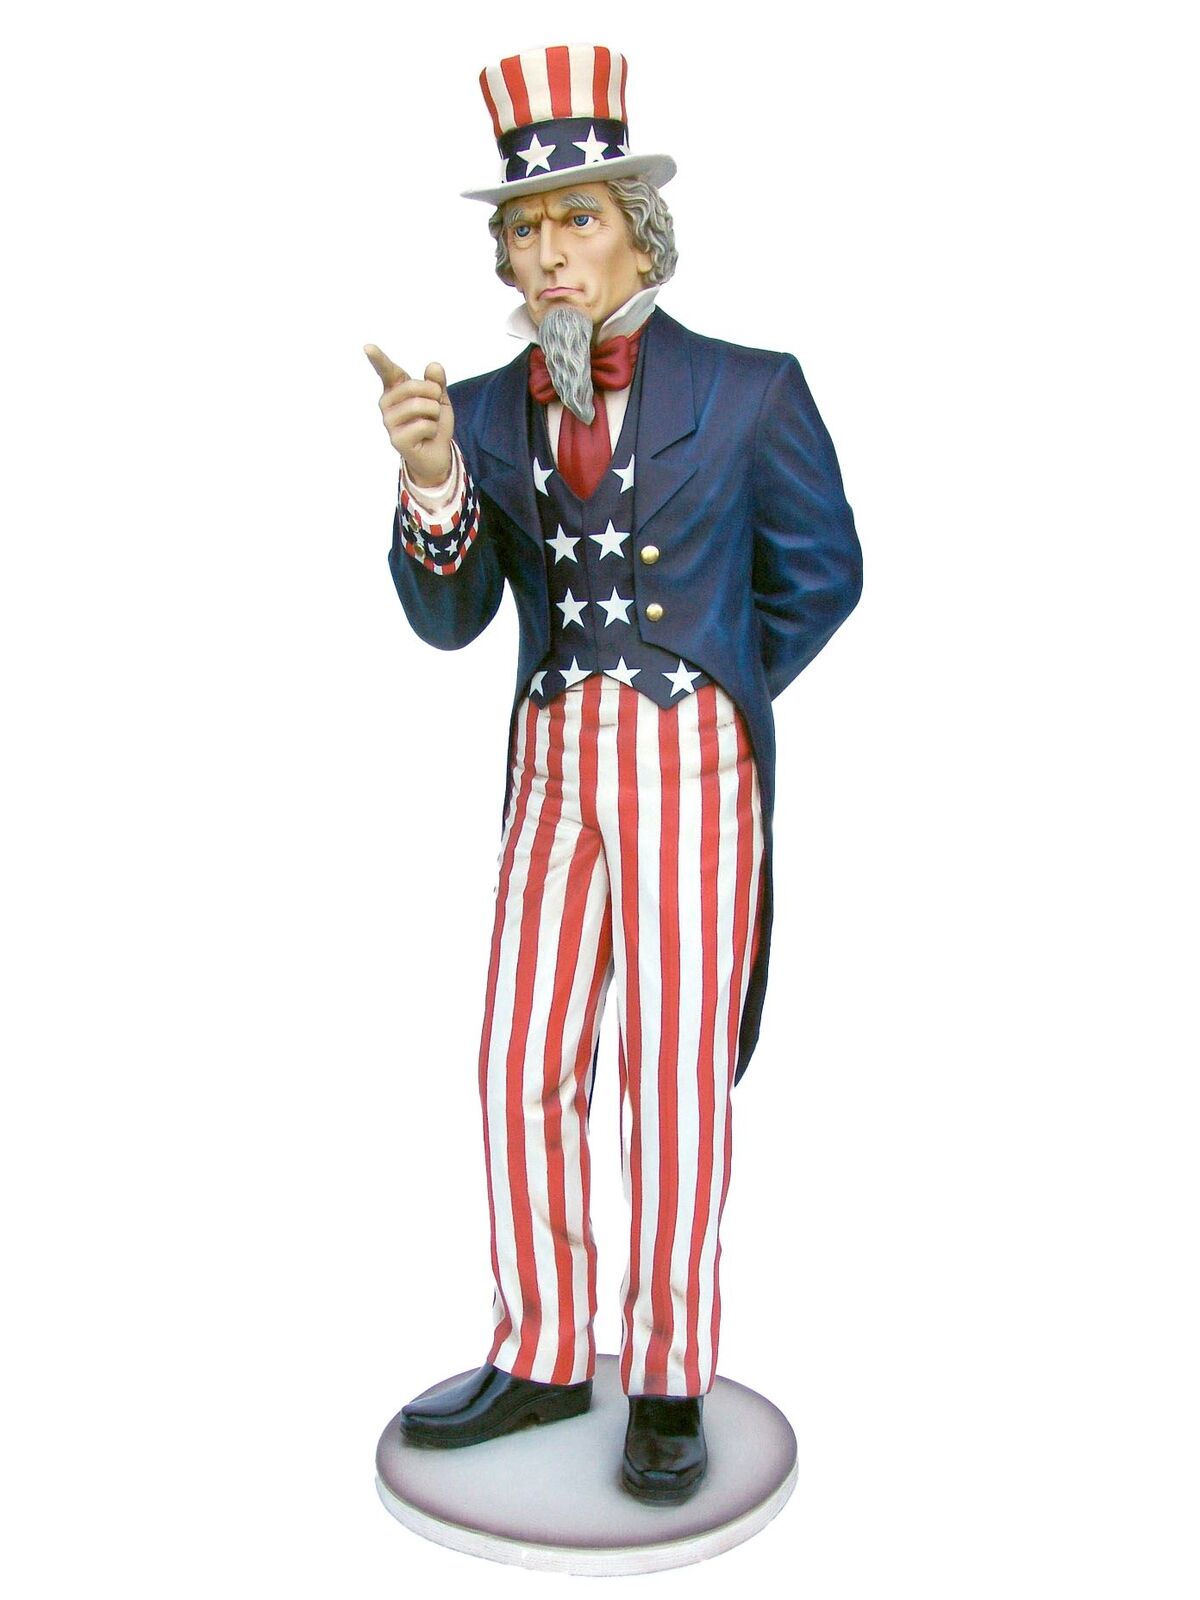 Giant Uncle Sam Life Size Resin Statue Fourth of July Theme Decor Display Prop